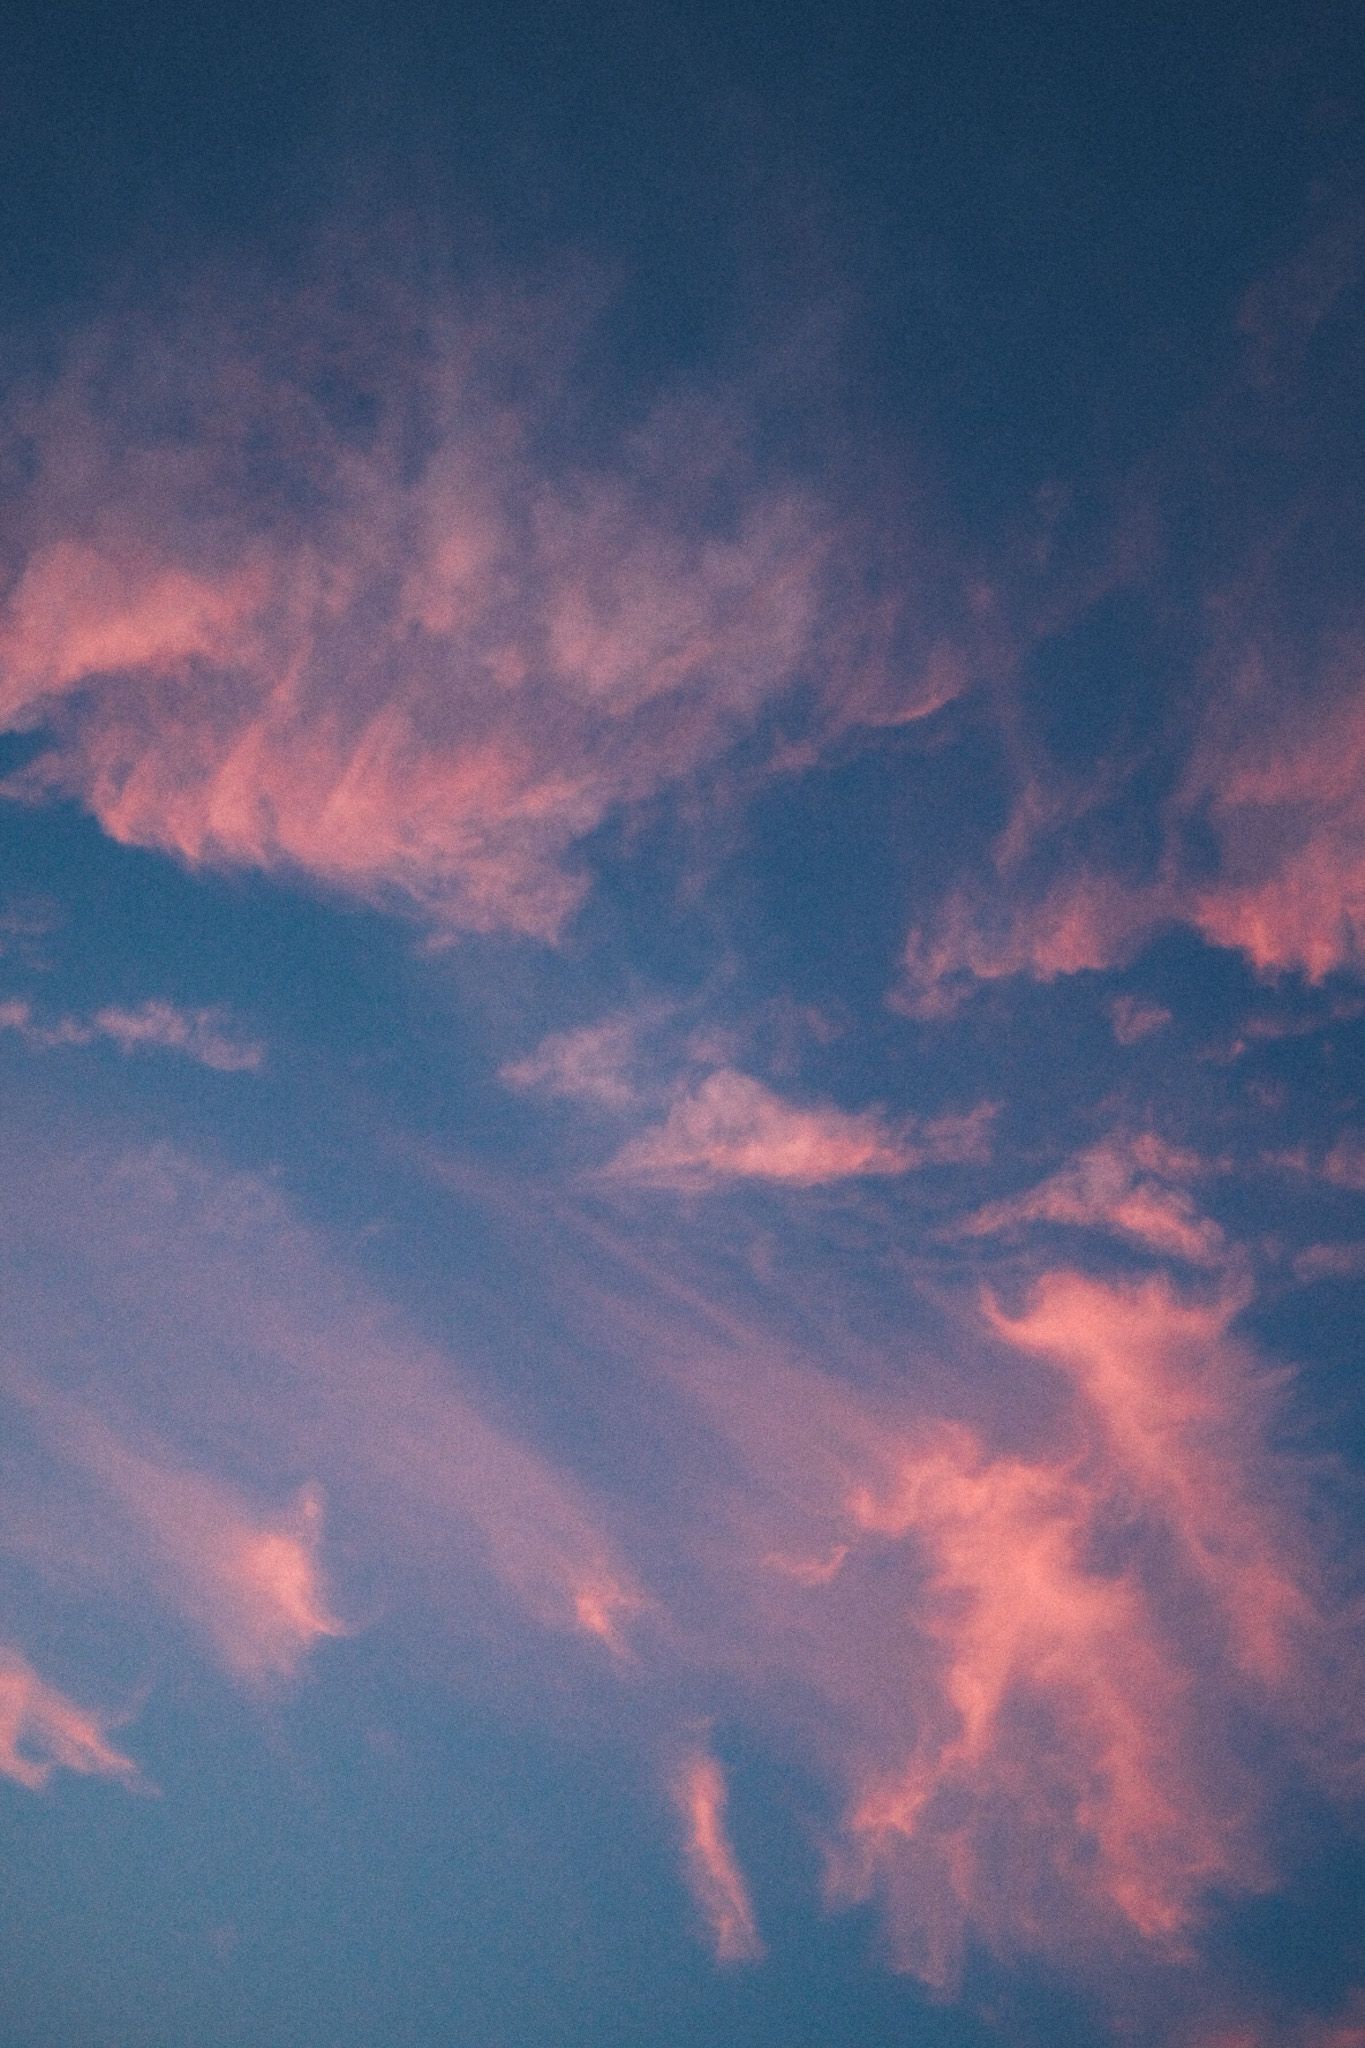 A blue sunset sky is filled with pink control candy wisps of clouds.